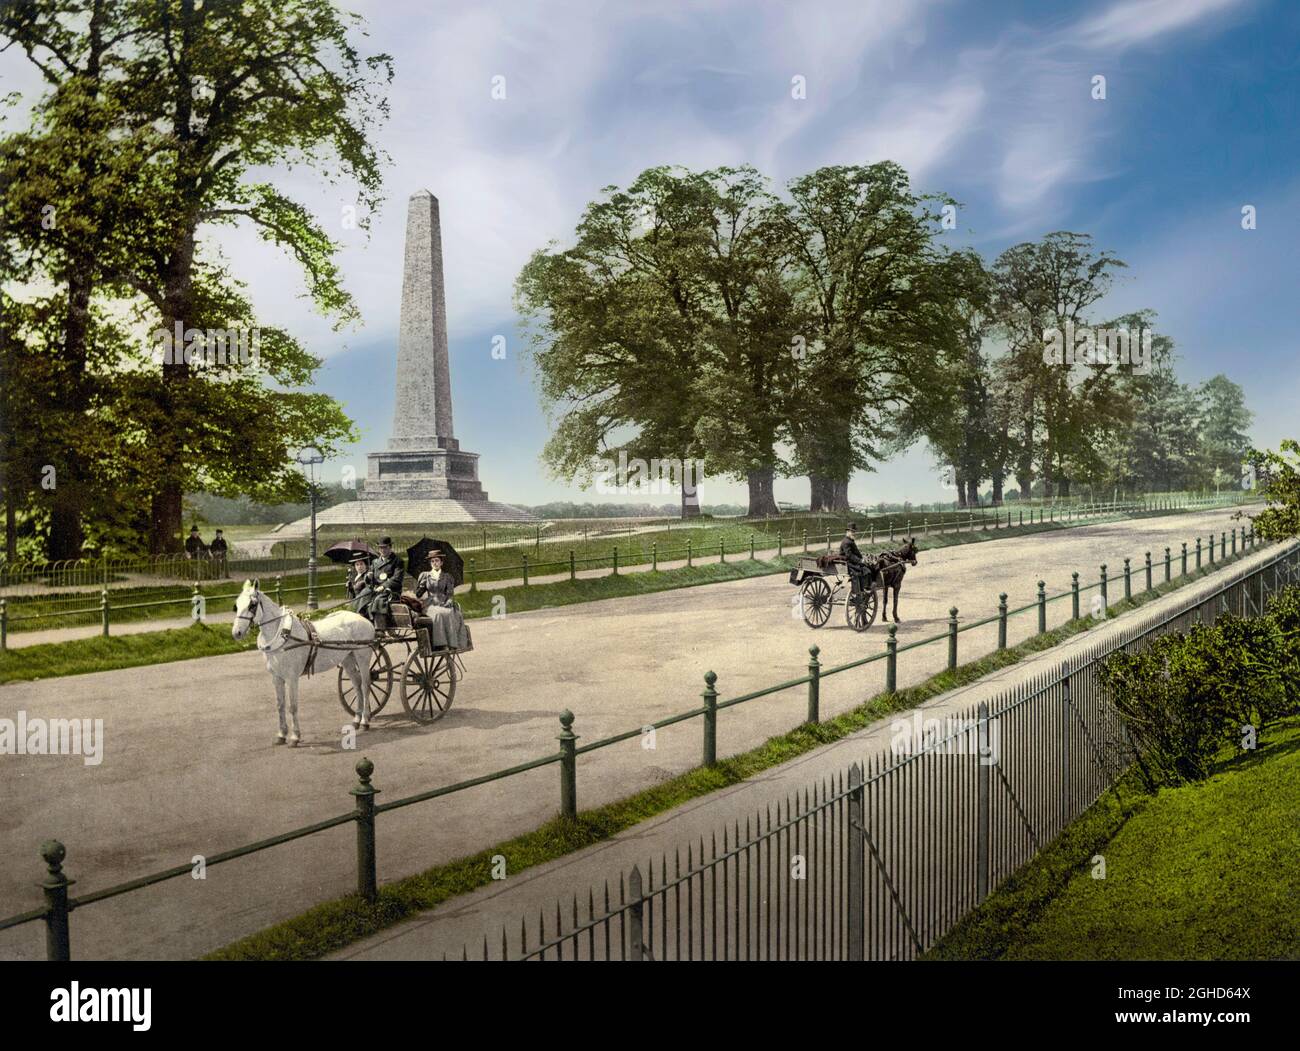 An early 20th century view of sightseers on a pony and trap passing the Wellington Monument, located in the Phoenix Park, Dublin City, Ireland. The 62 metres (203 ft) tall obelisk designed by Robert Smirke, commemorates the victories of the Duke of Wellington and is the largest obelisk in Europe. Stock Photo